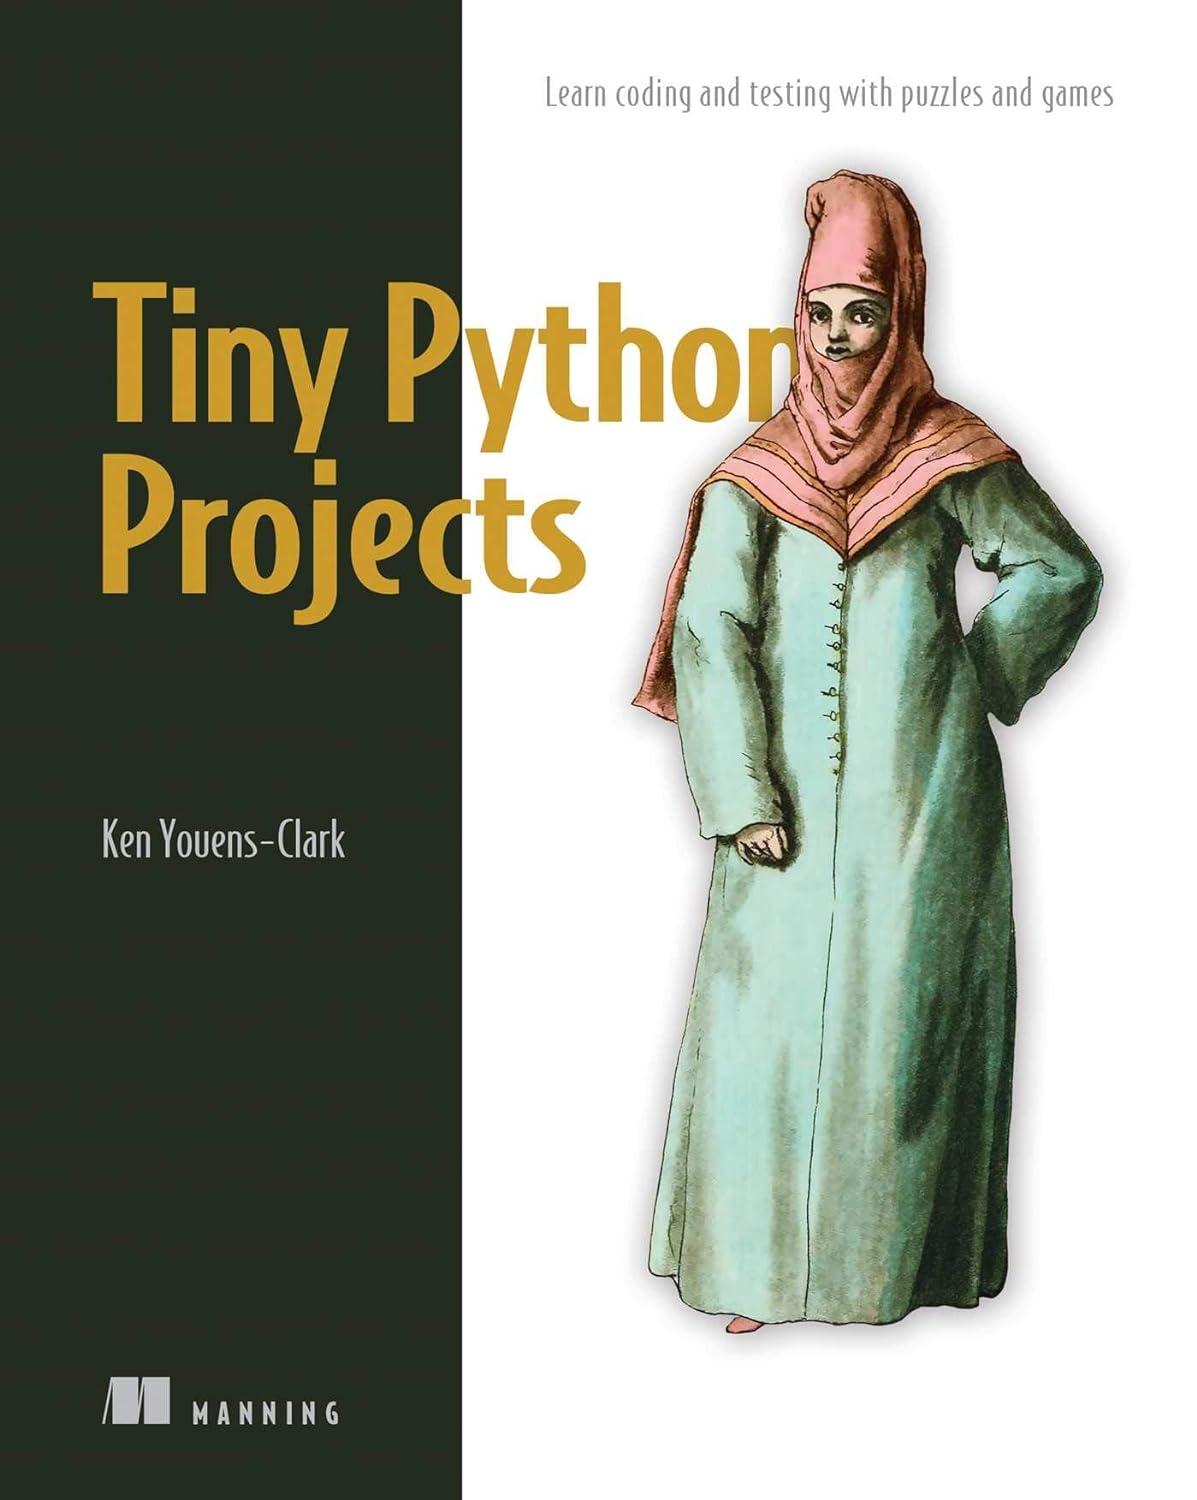 tiny python projects learn coding and testing with puzzles and games 1st edition ken youens clark 1617297518,